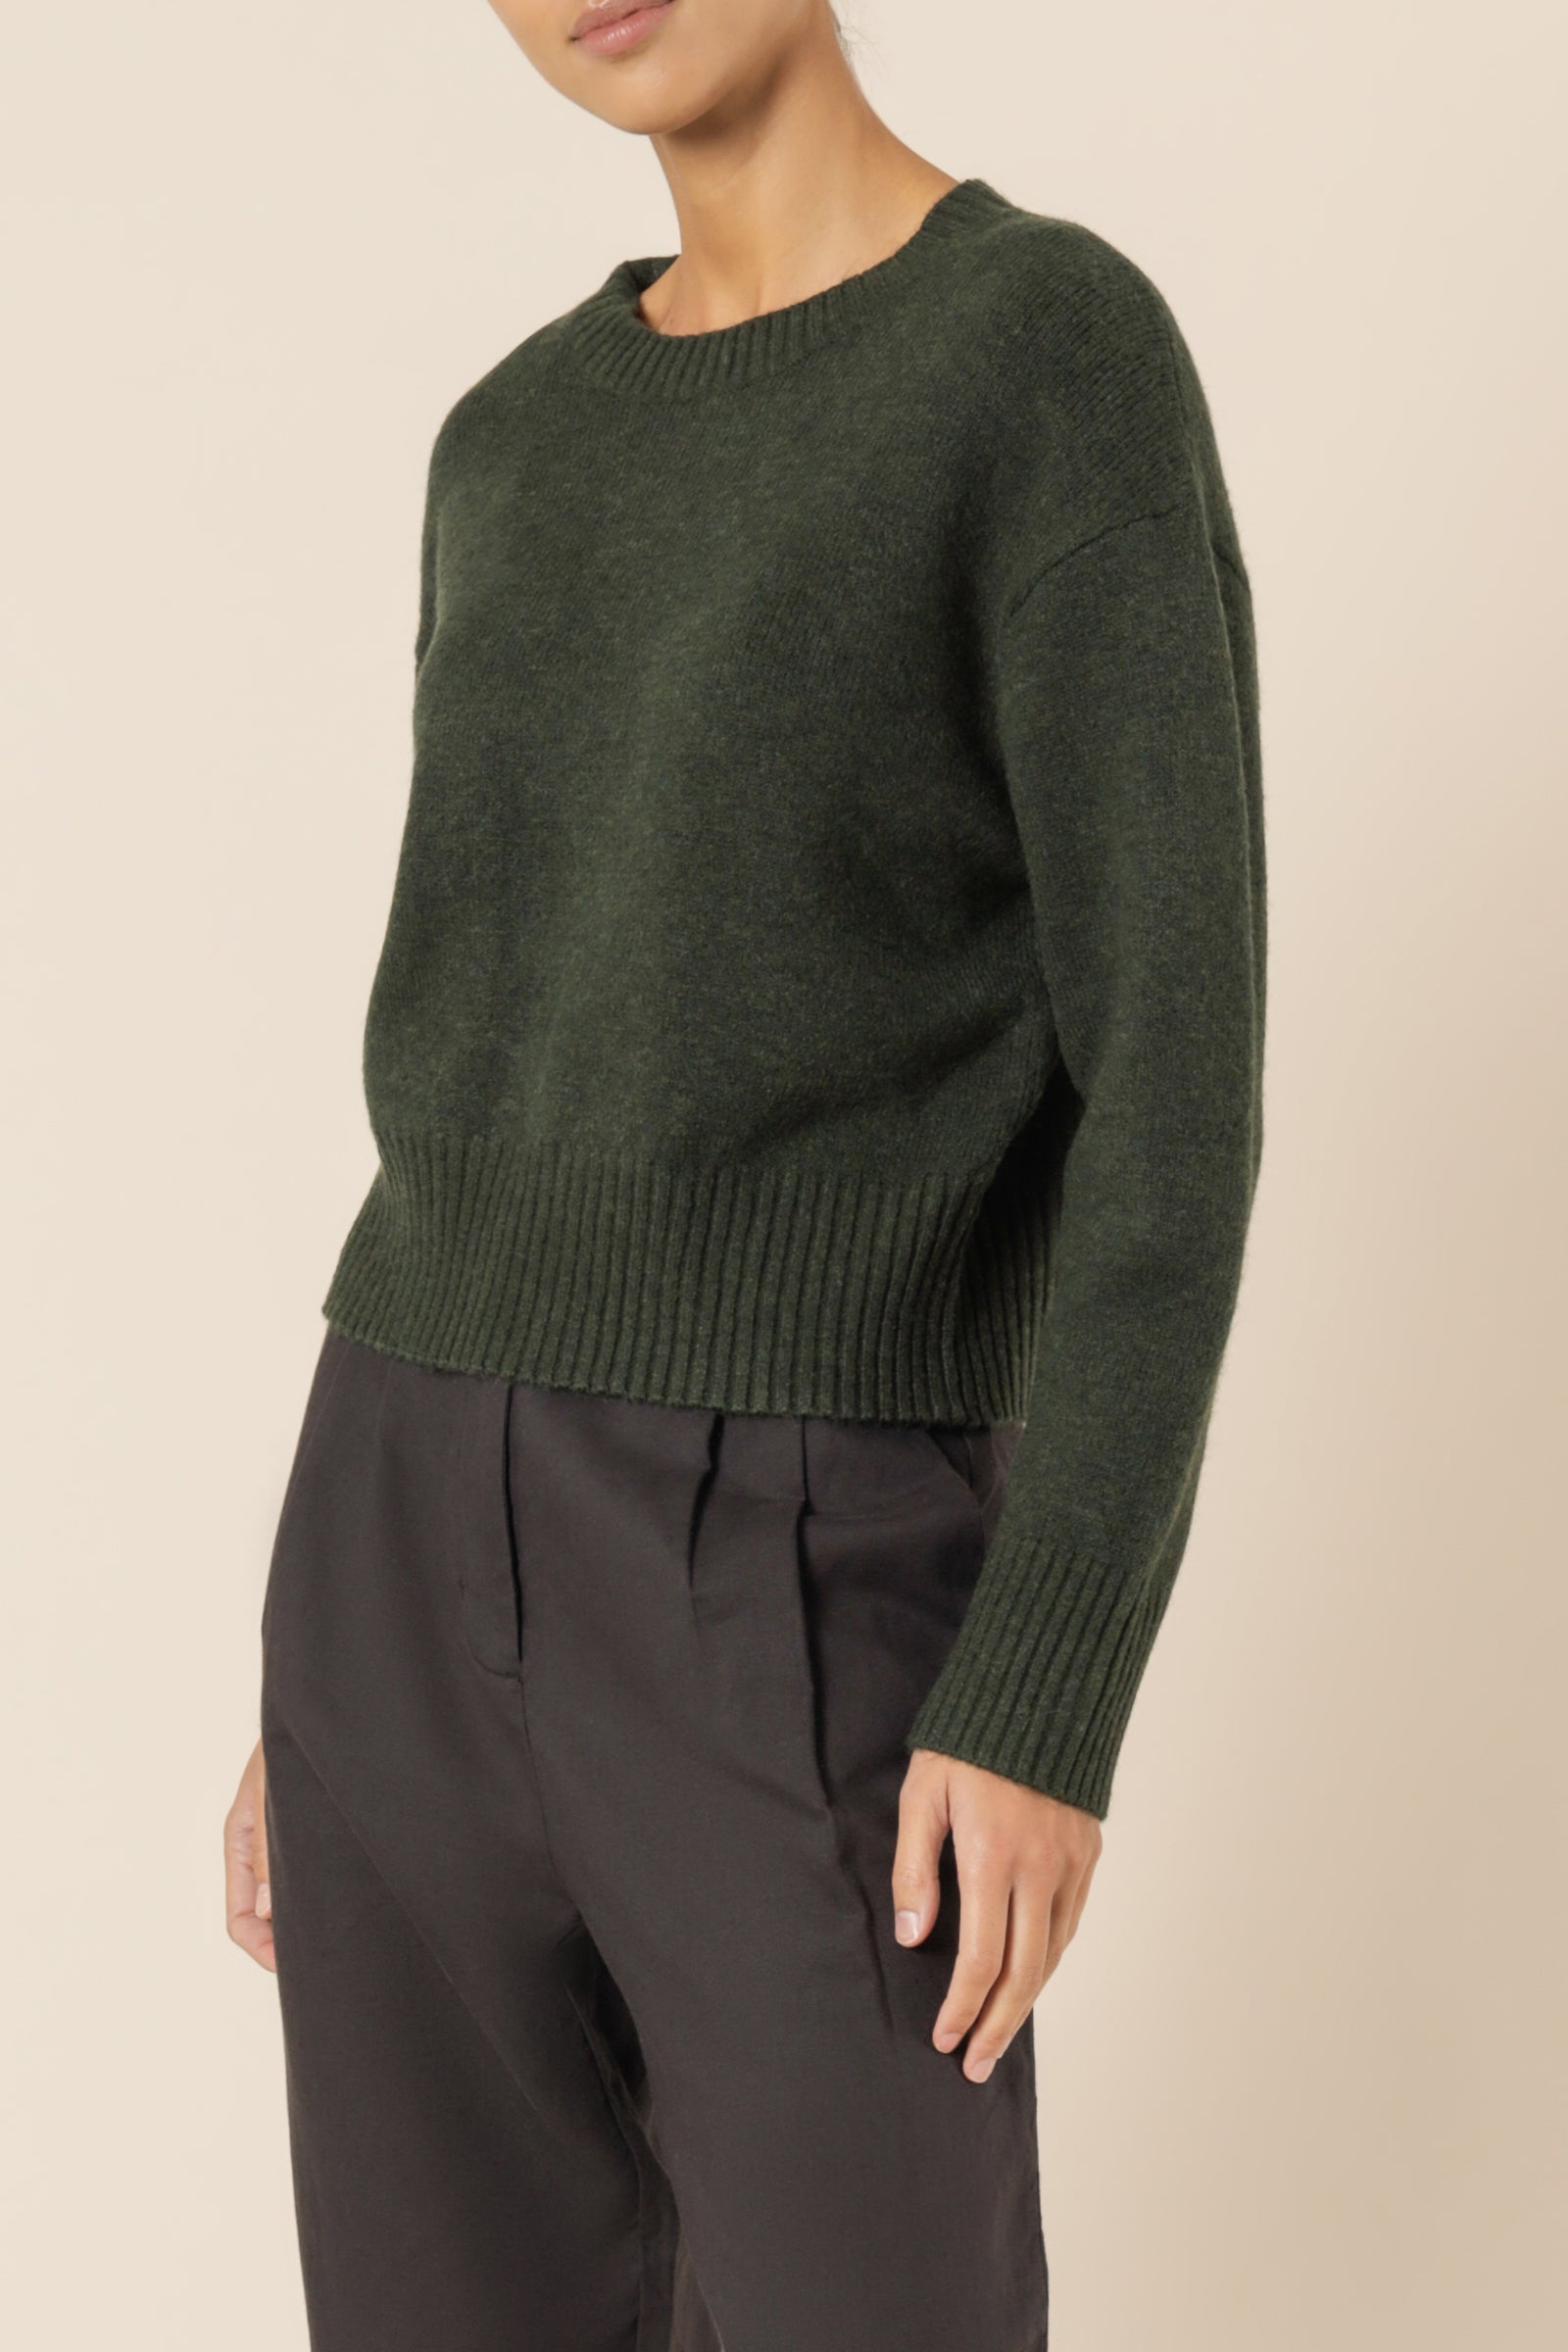 Nude Lucy Ari Knit Jumper Forest Knits 